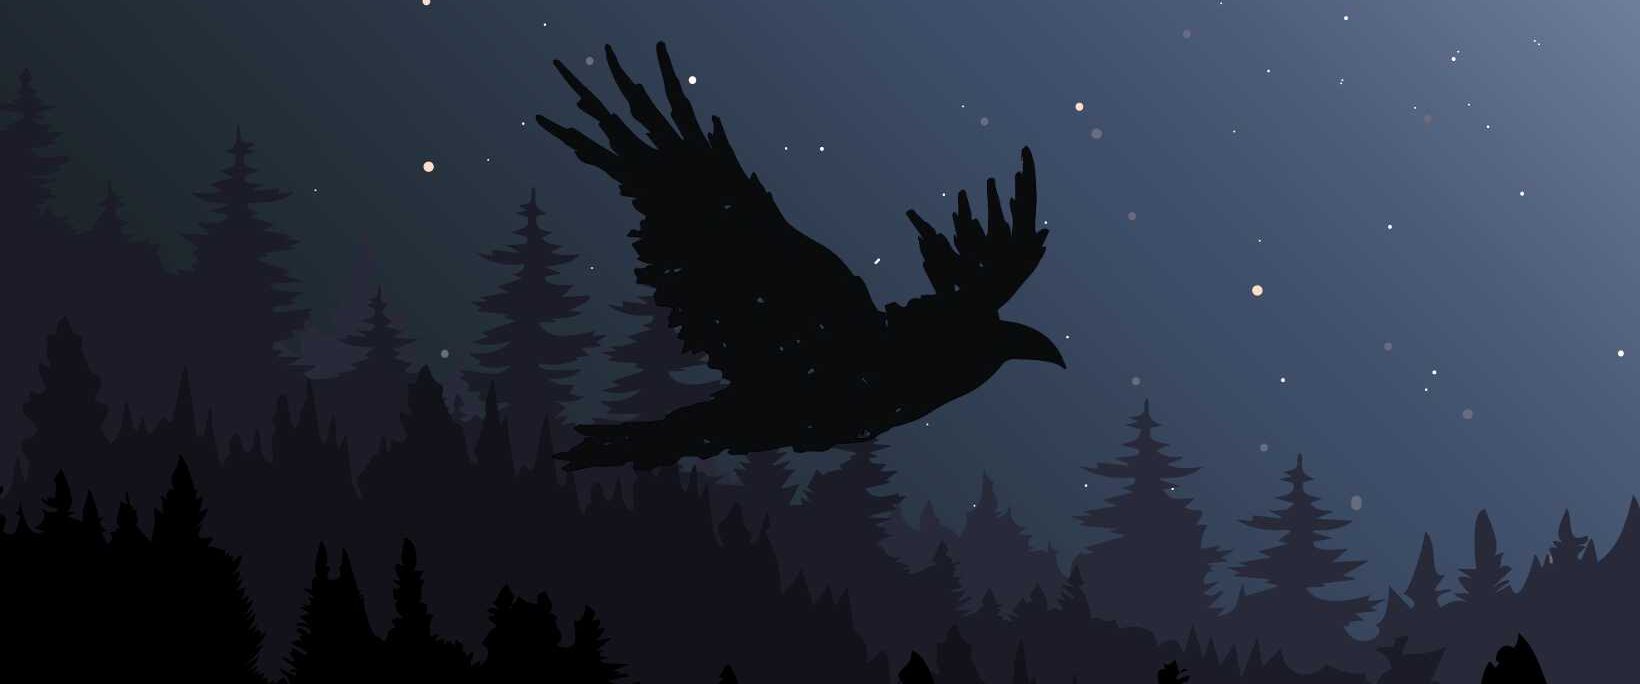 “Raven Steals the Light”: A Fable that Reminds Us Who We Are